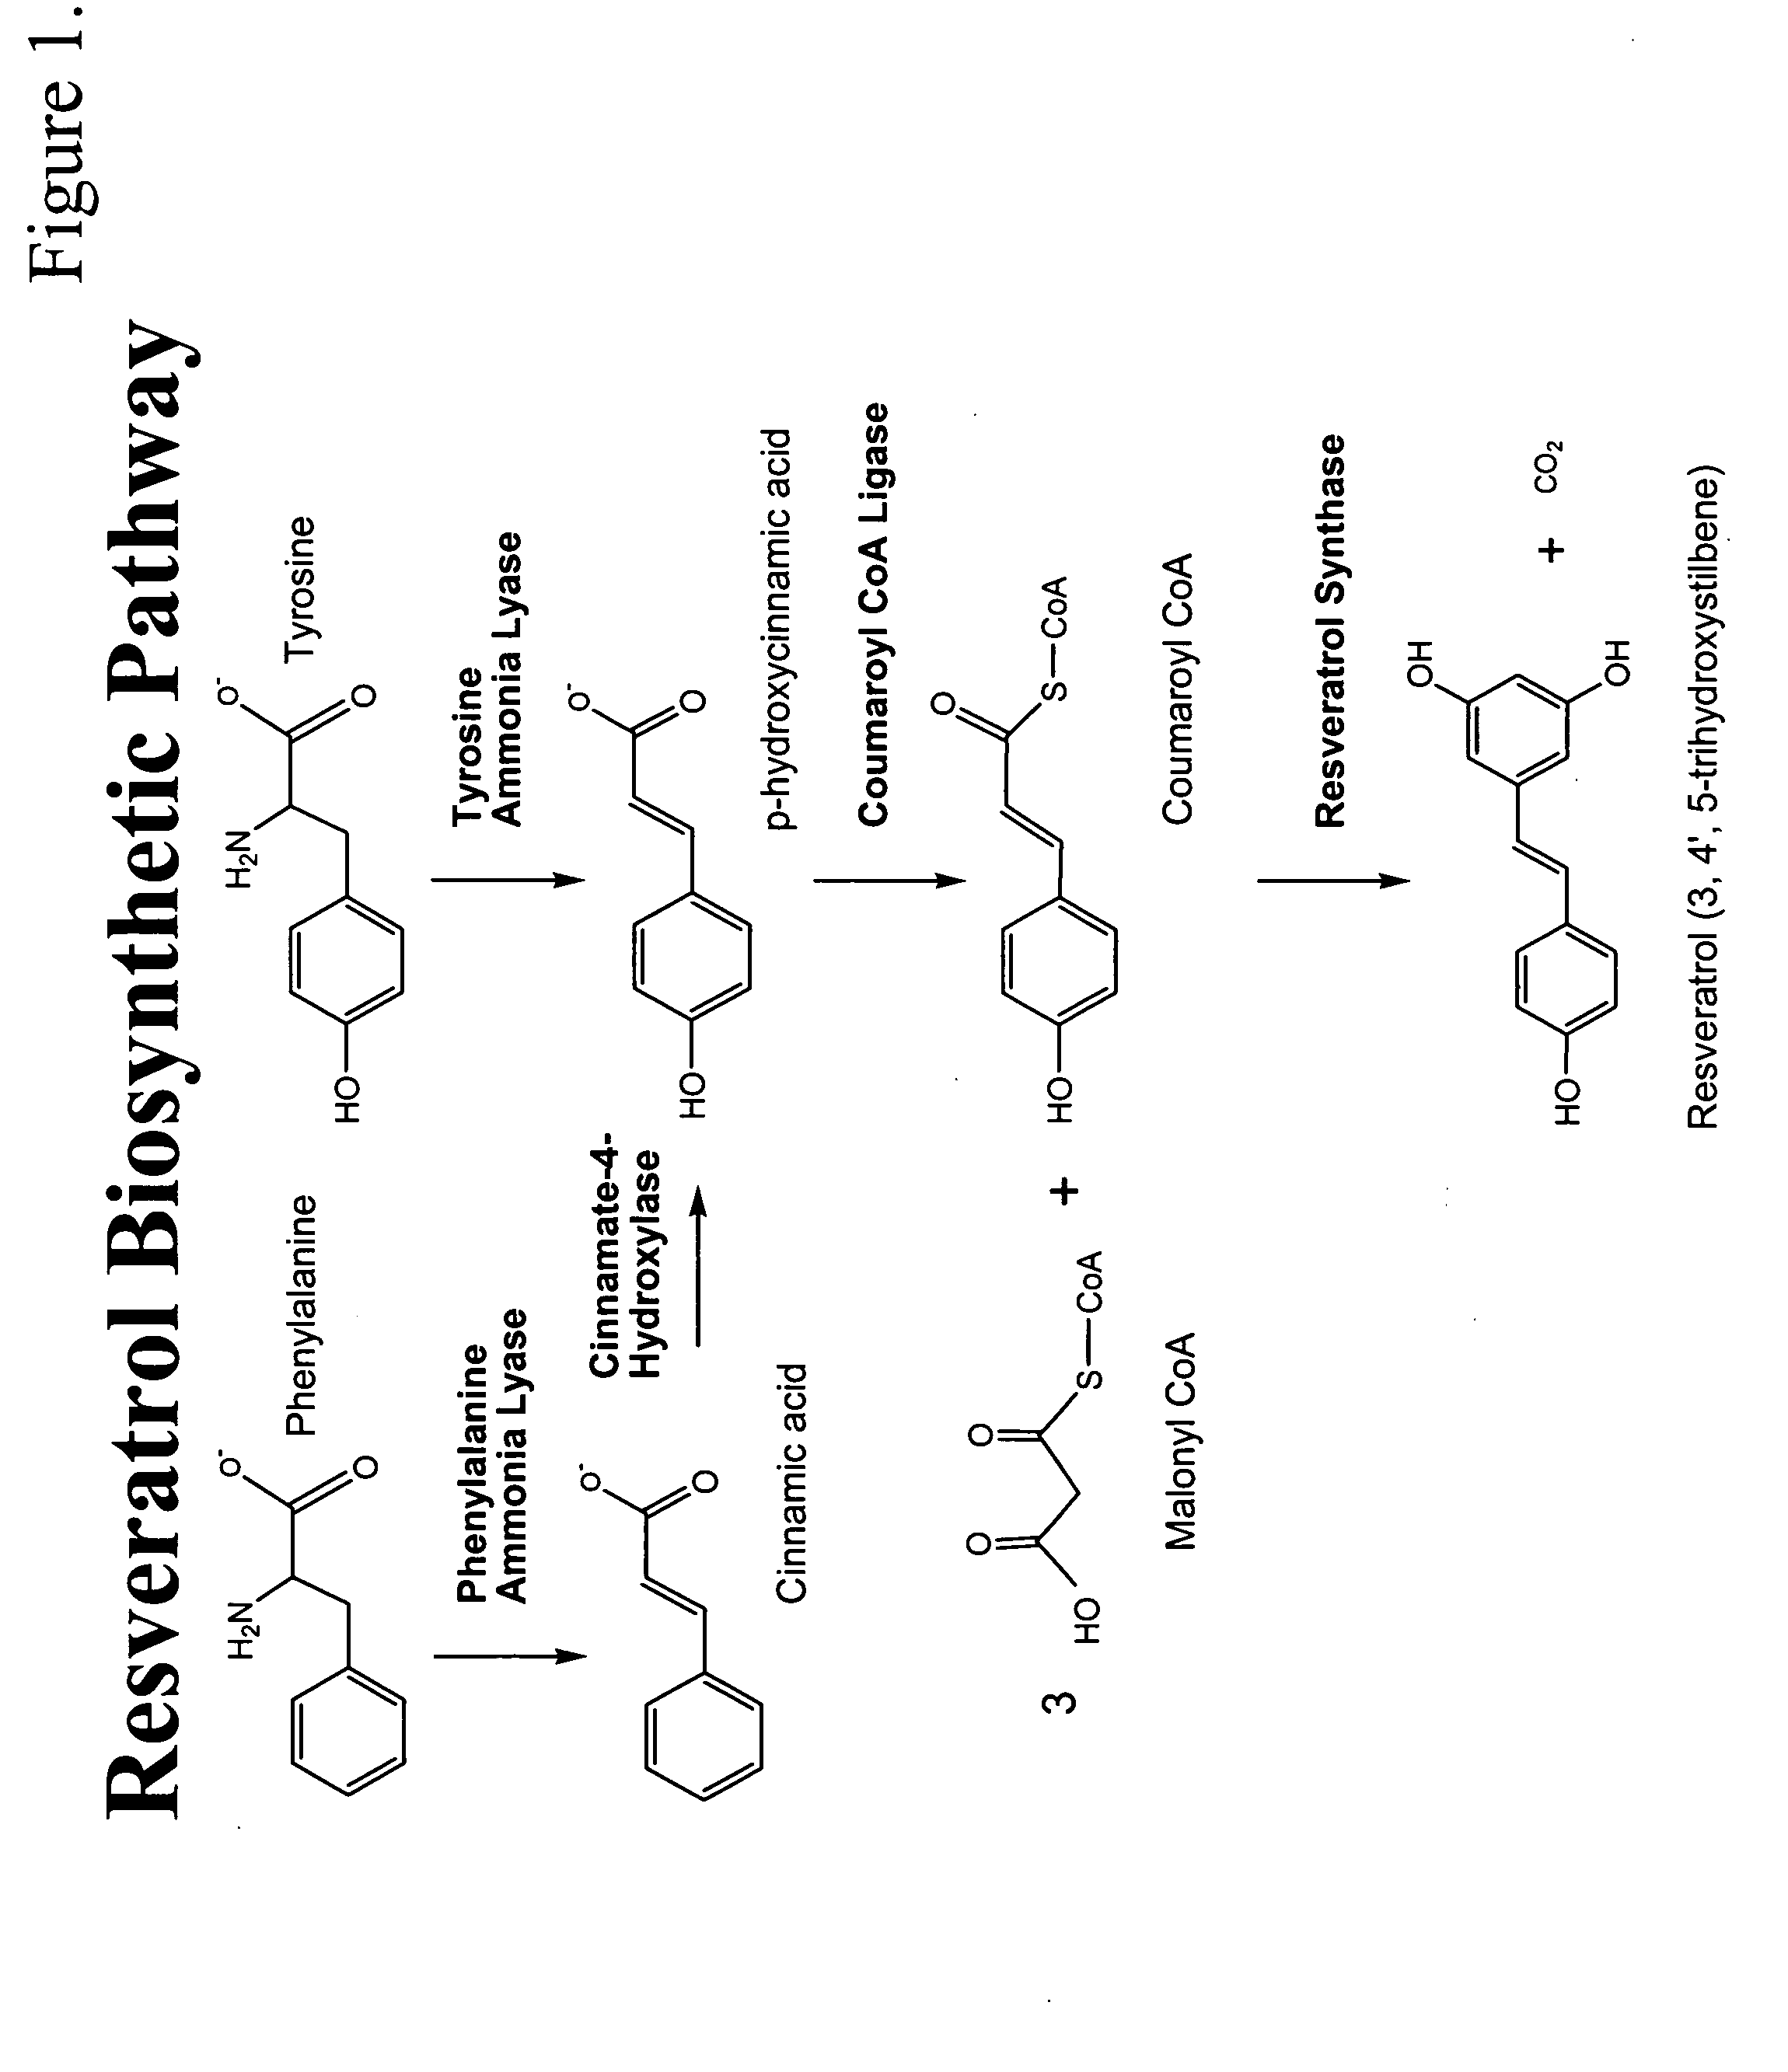 Method for the production of resveratrol in a recombinant oleaginous microorganism